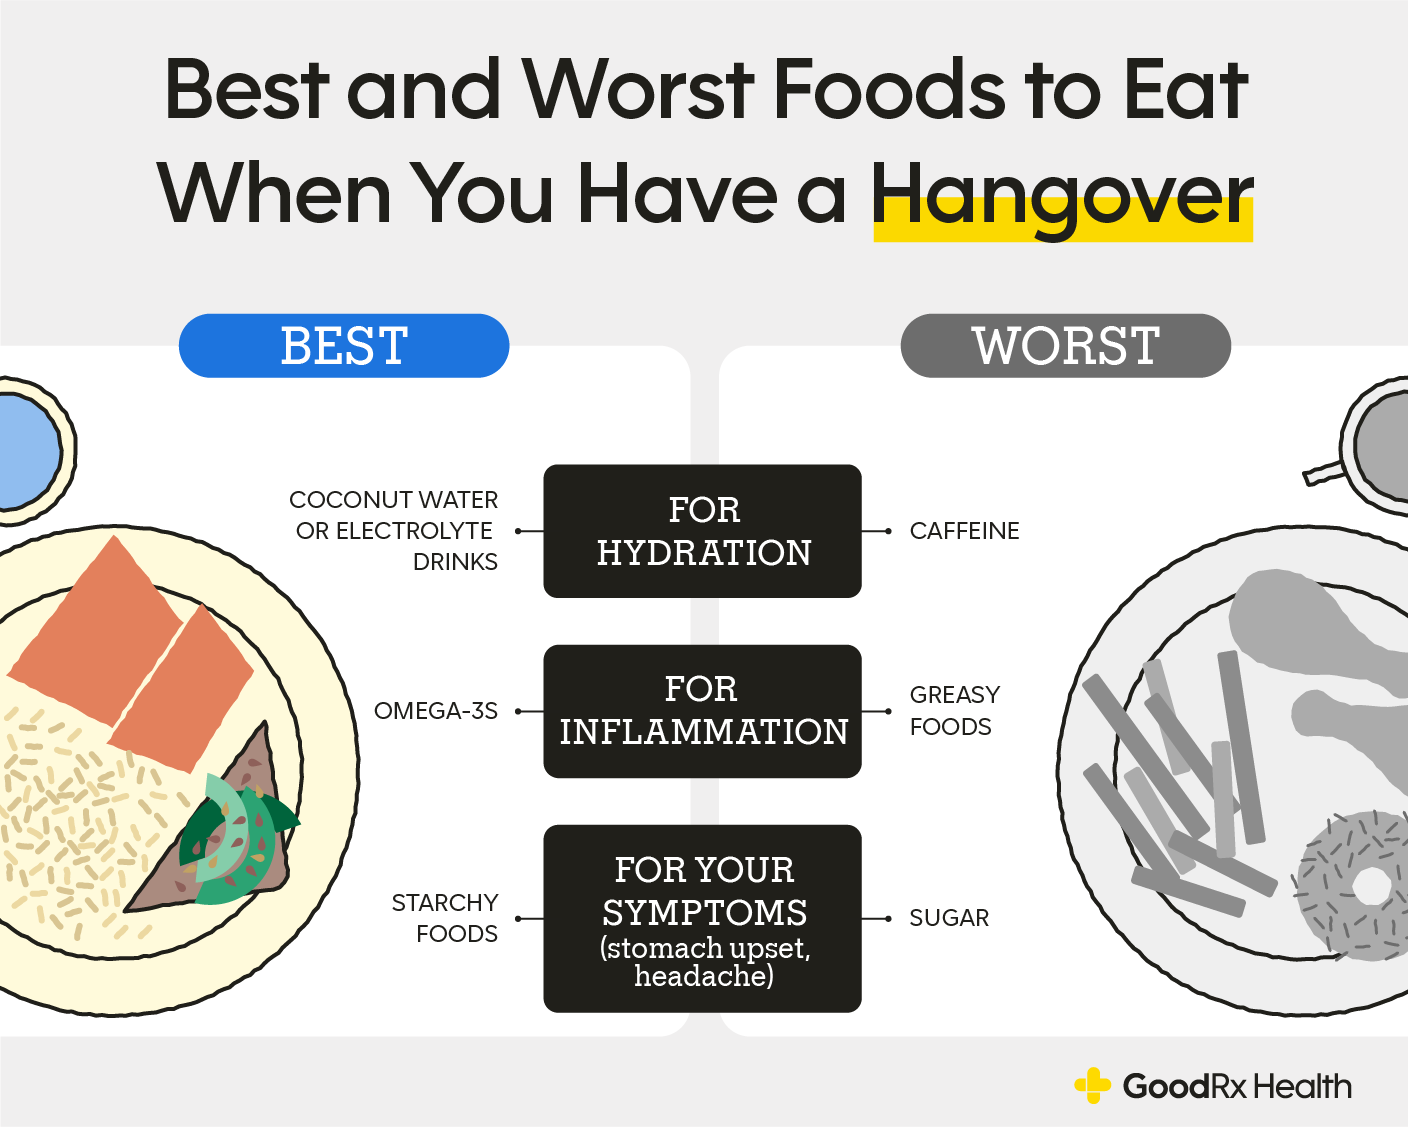 How to Prevent a Hangover Before, During, and After Drinking